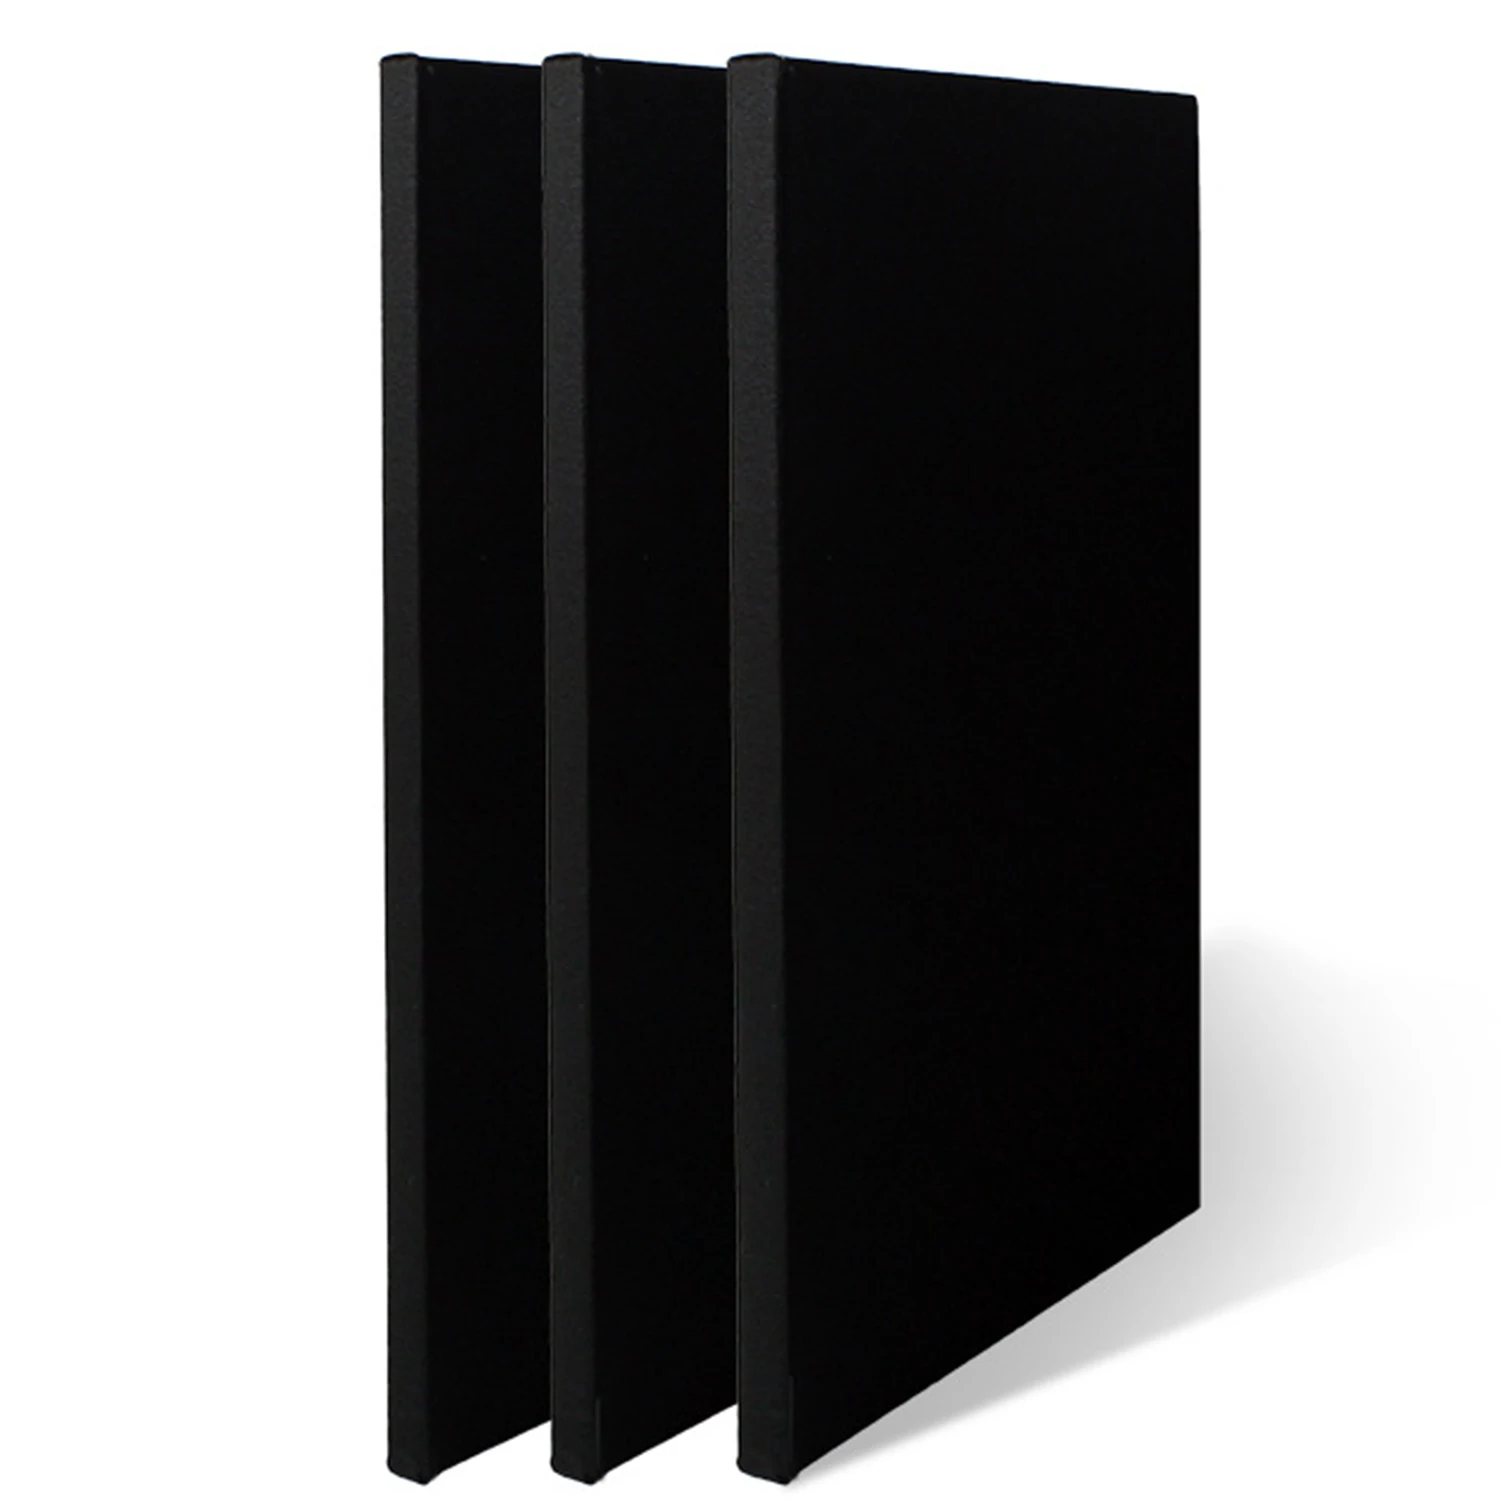 

Black Stretched Canvas for Painting 12x16in Set of 4 Primed 100% Cotton Artist Blank Canvas Boards for Painting, Acrylic Pouring